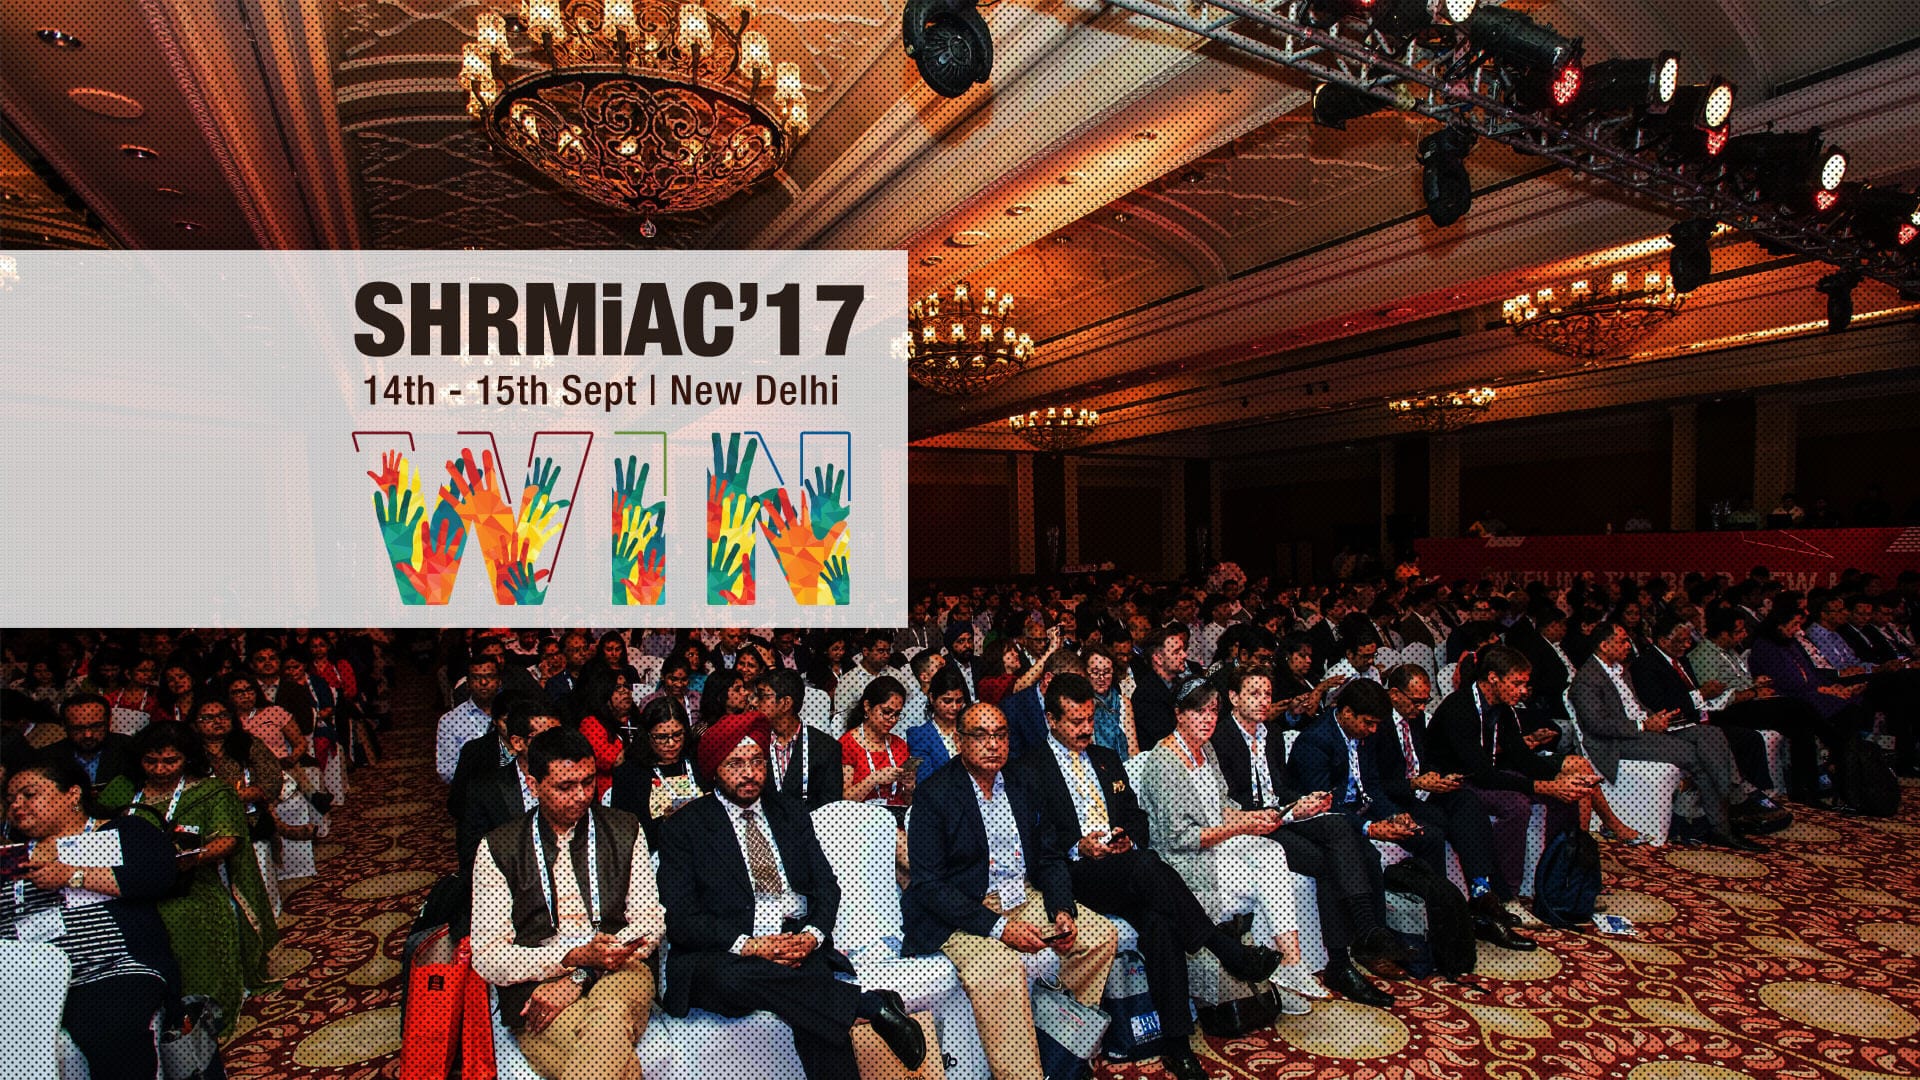 SHRM India to host India’s leading HR and business conference in September 2017